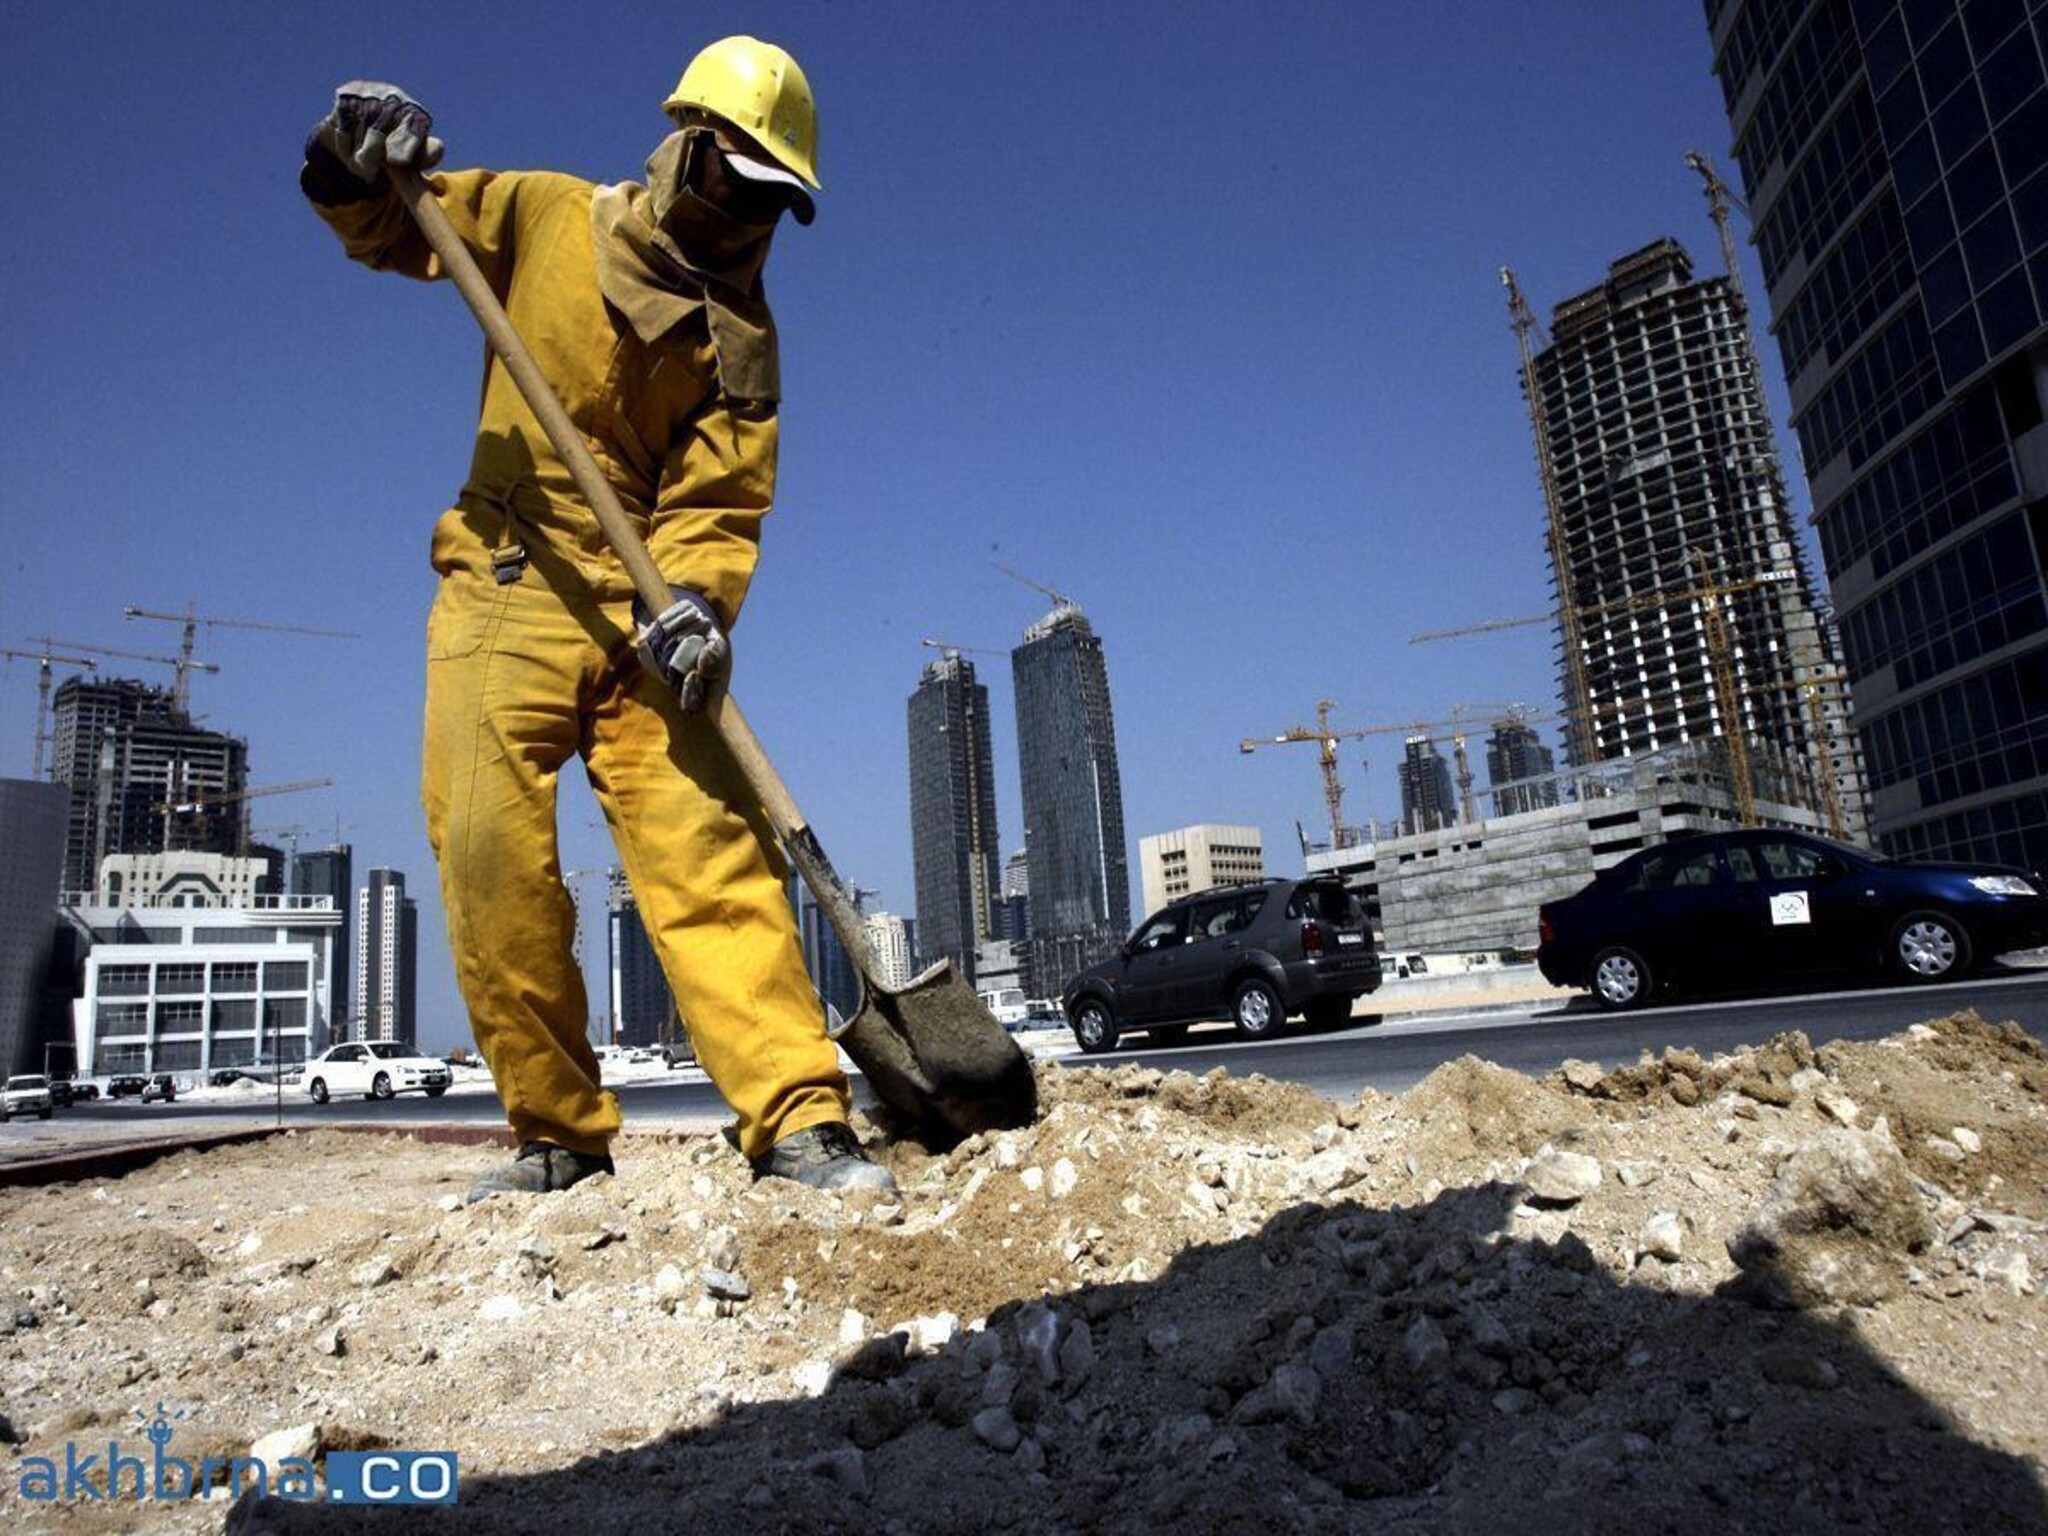 Bahrain announces outdoor work ban starting July 1, with fines reaching $2,650